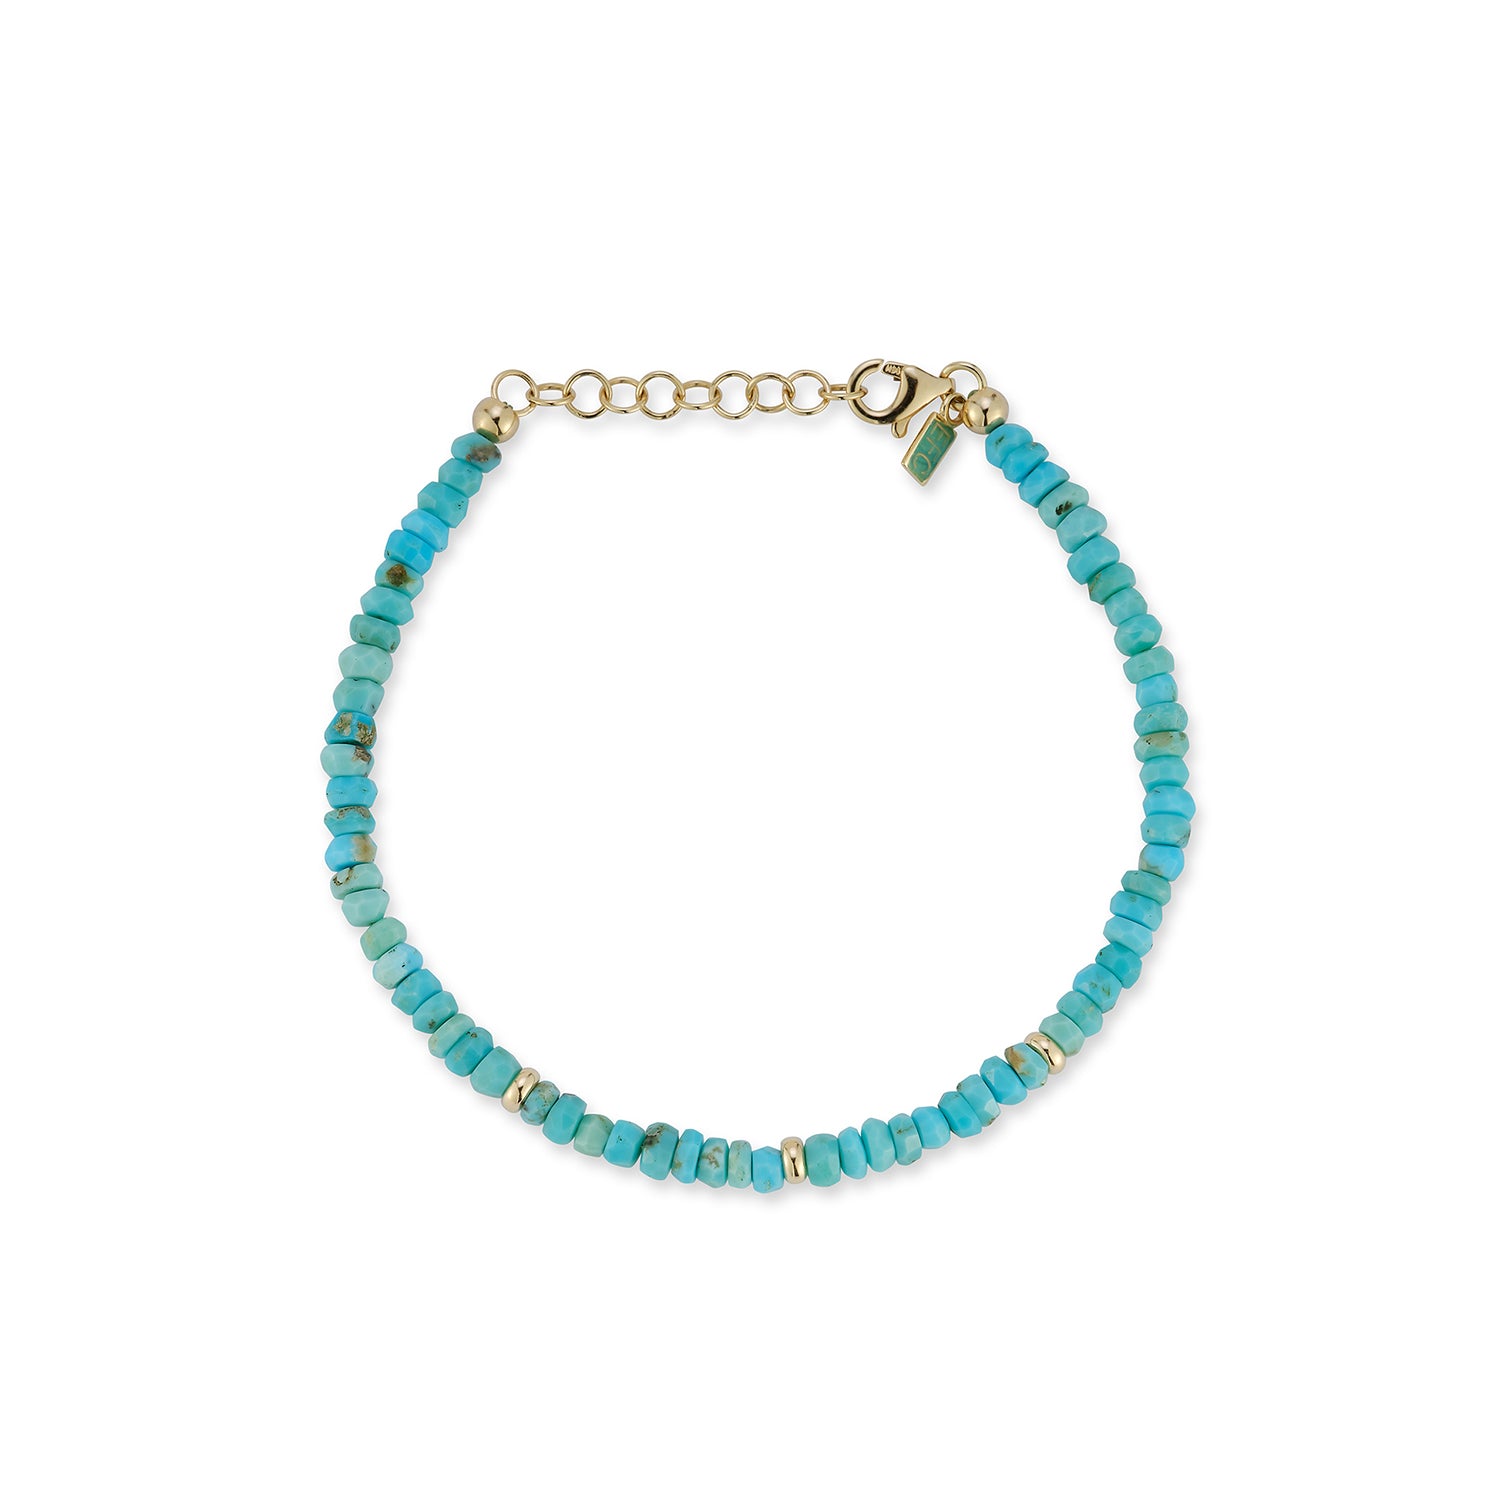 Birthstone Bead Bracelet In Turquoise with 14k yellow gold chain